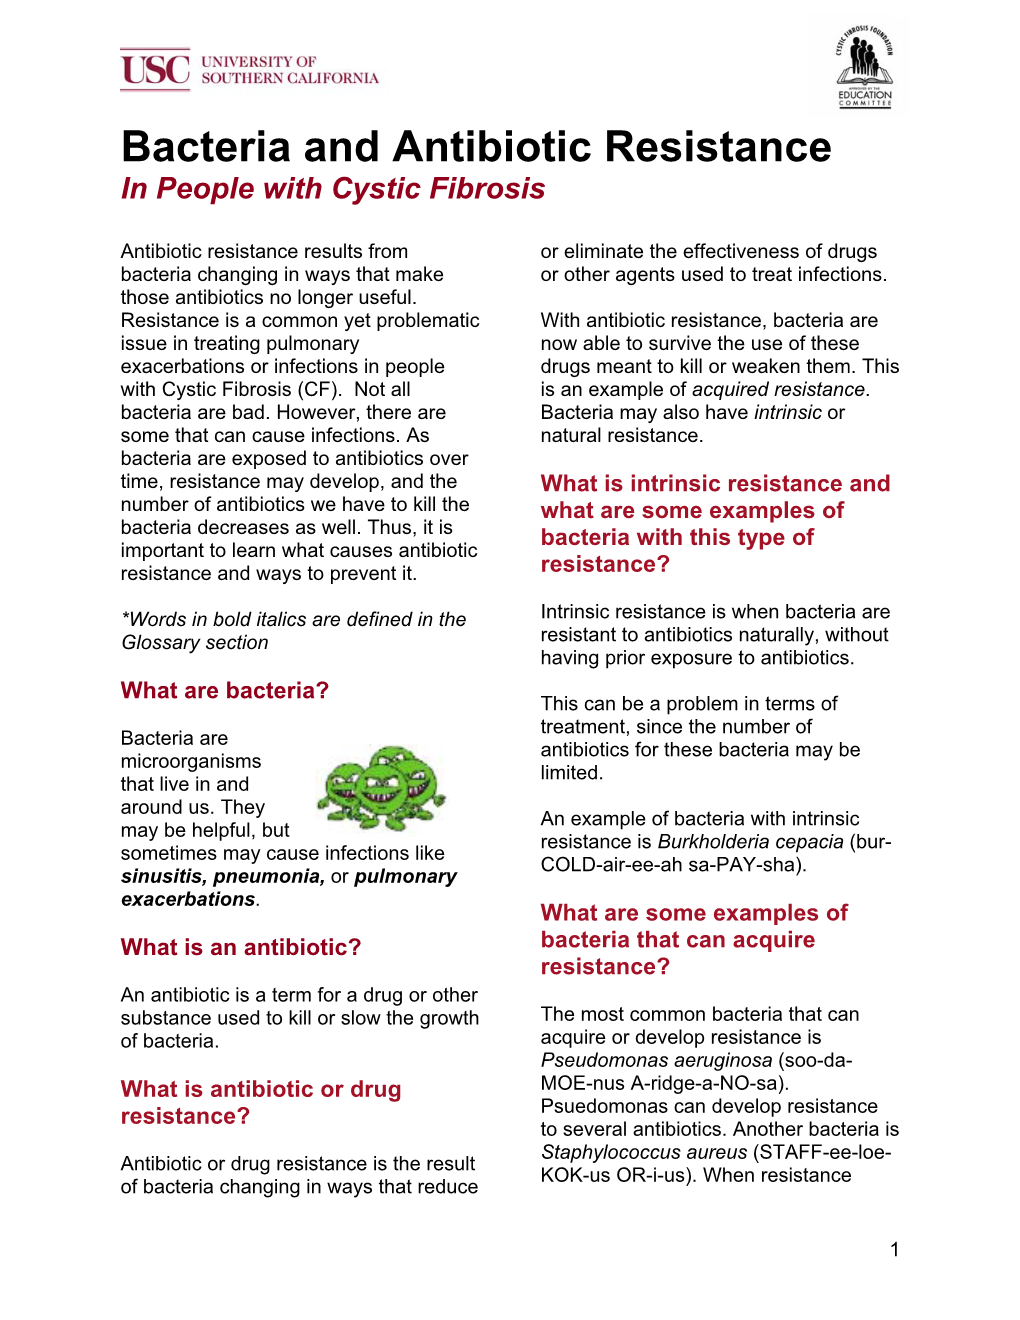 Antibiotic Resistance in People with Cystic Fibrosis